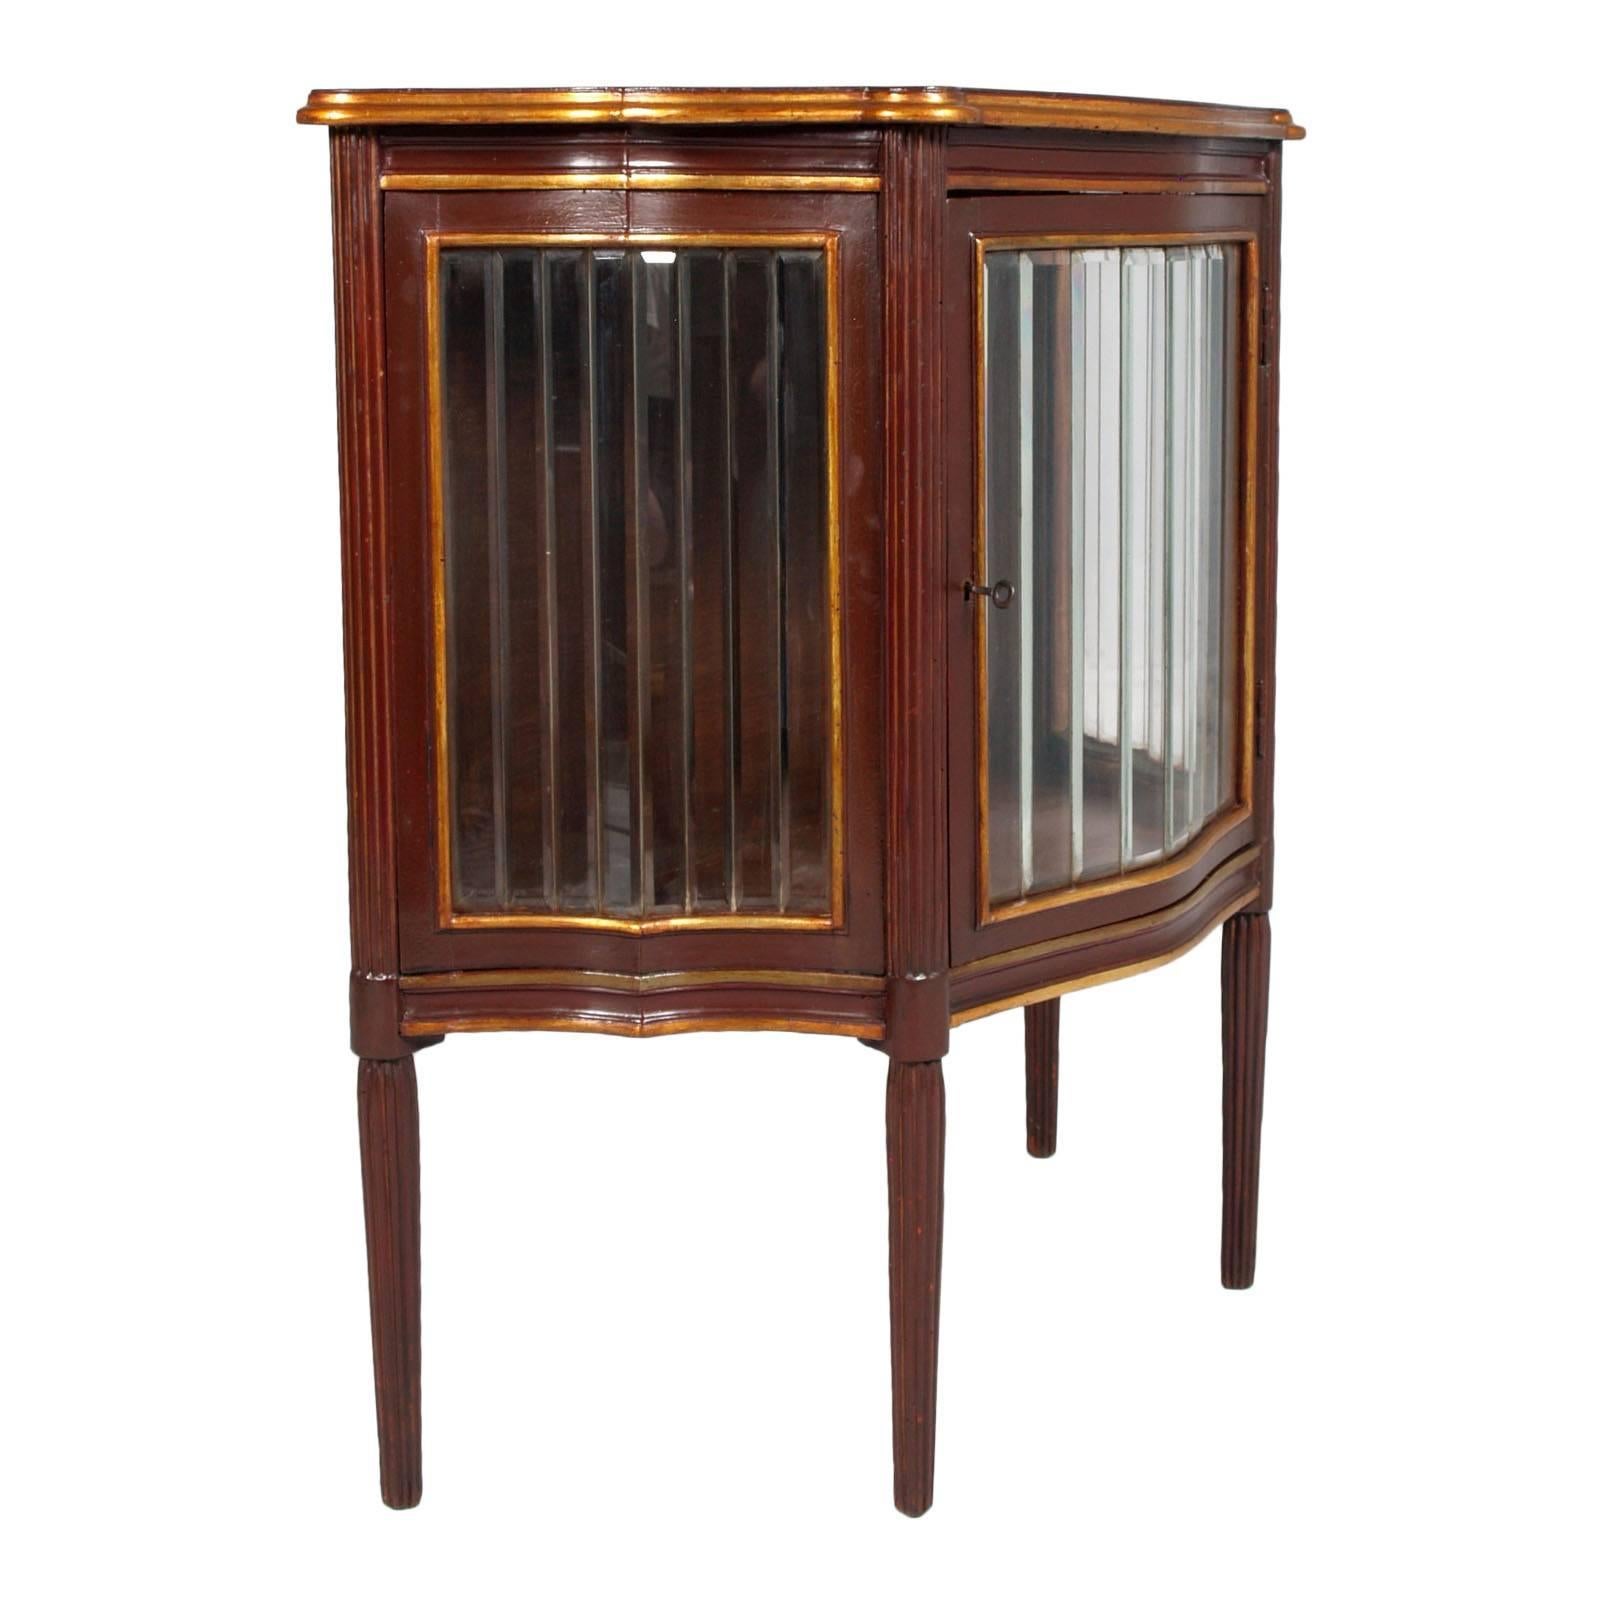 Art Nouveau vitrine cupboard in lacquered and gilded mahogany with all accosted glazed glass. 
Legs a hand-carved, lacquered mahogany columns; edgings in gold leaf gilded relief

Measures cm: D 40, W 93, H 91.